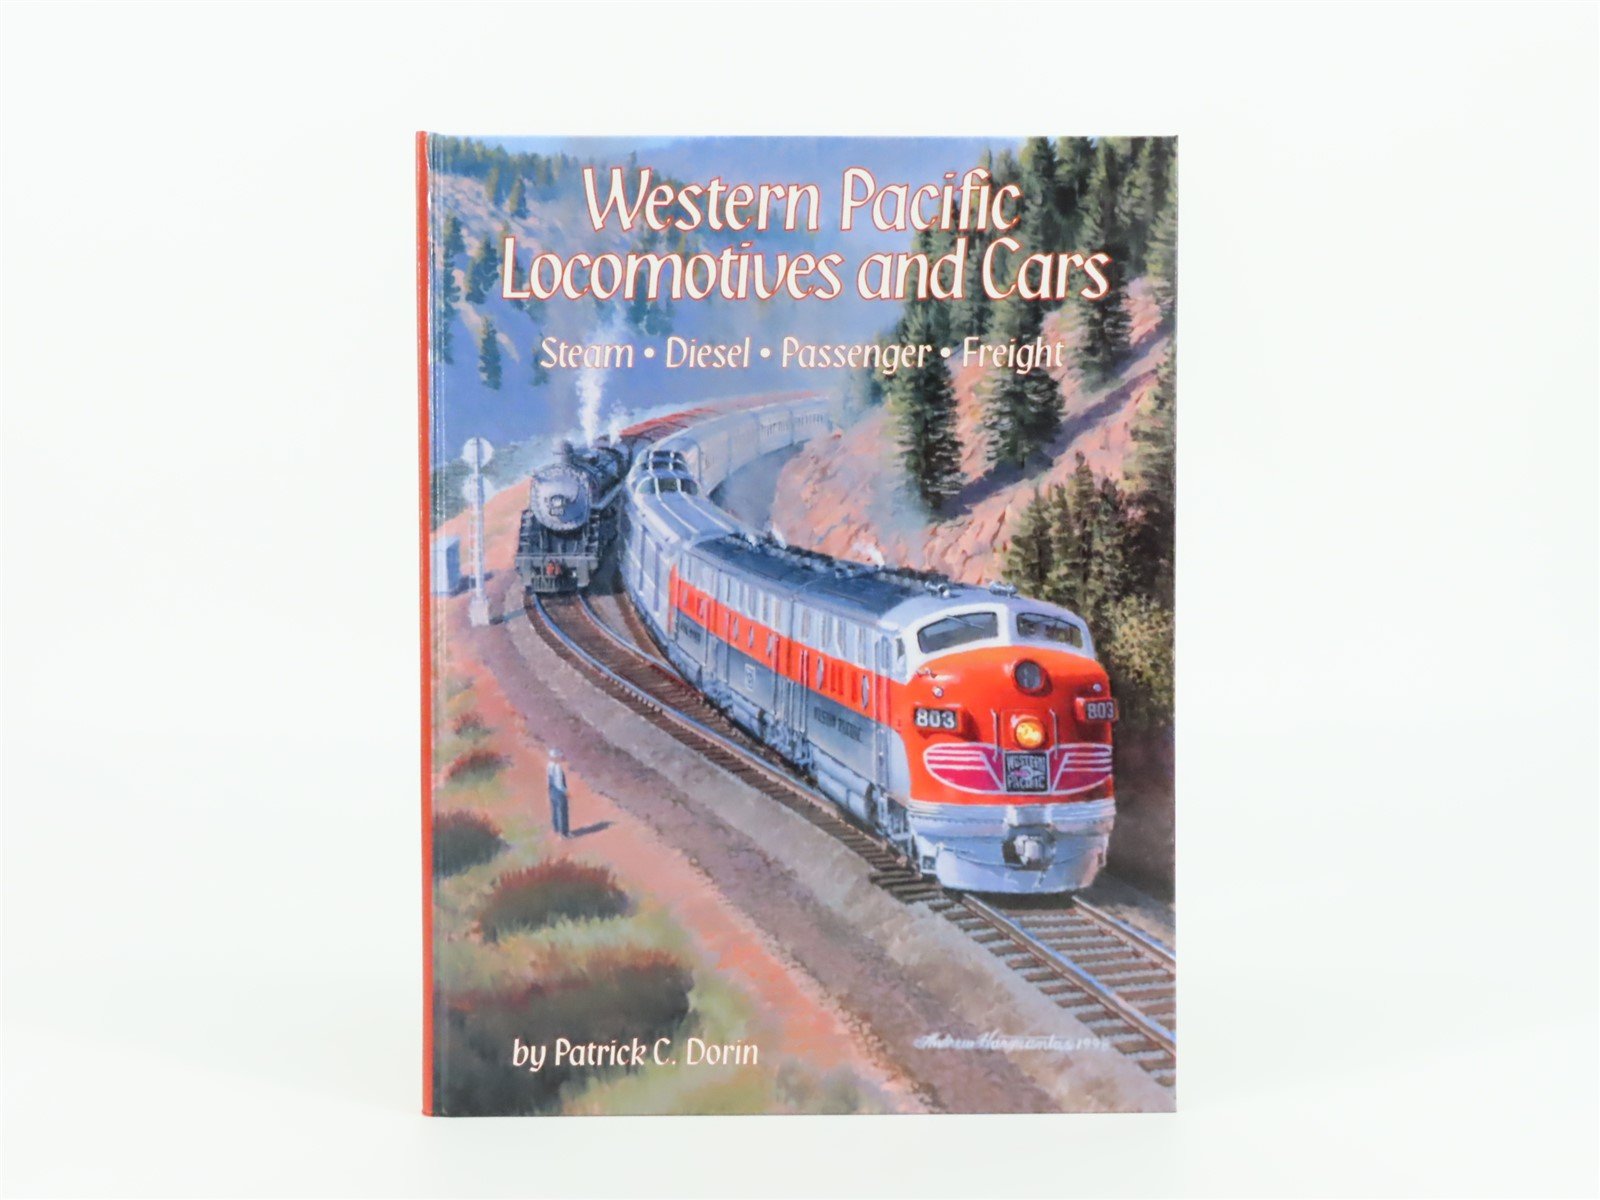 Western Pacific Locomotives and Cars by Patrick C. Dorin ©1998 HC Book